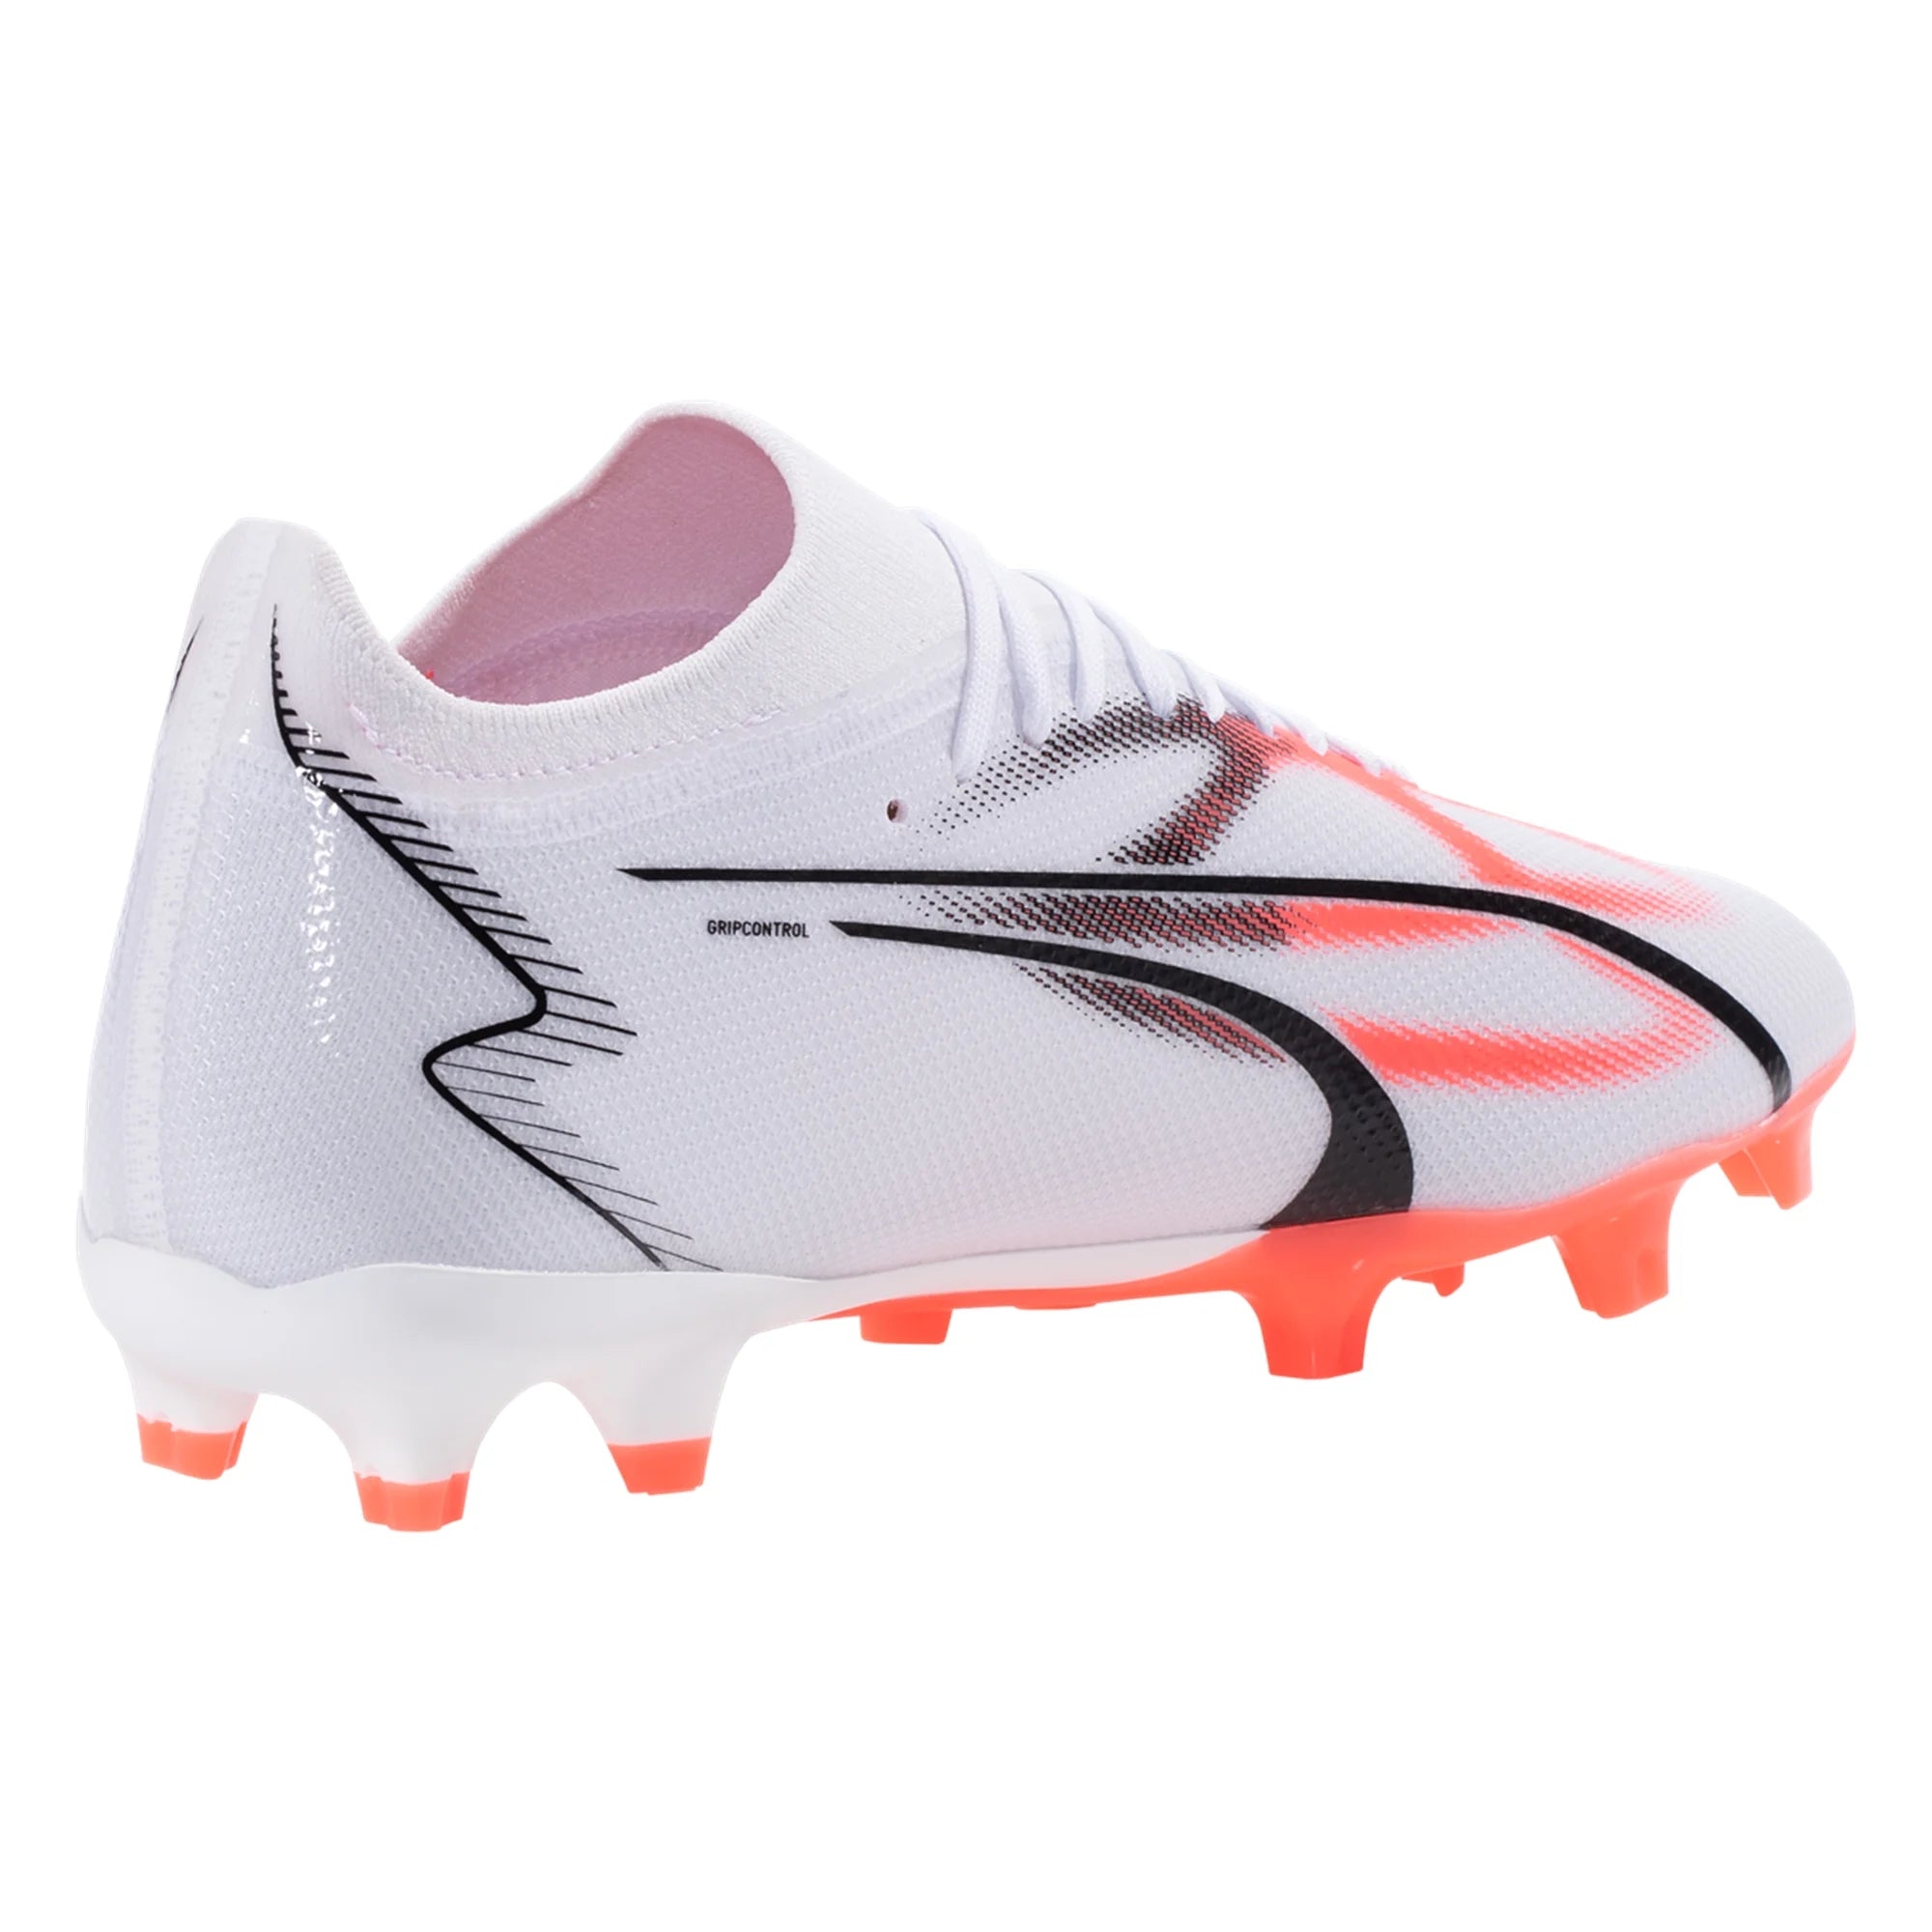 Match FG/AG Soccer 107347-01 Cleat Puma - Orchid USA Soccer White/Black/Fire Zone – Firm Ultra Ground